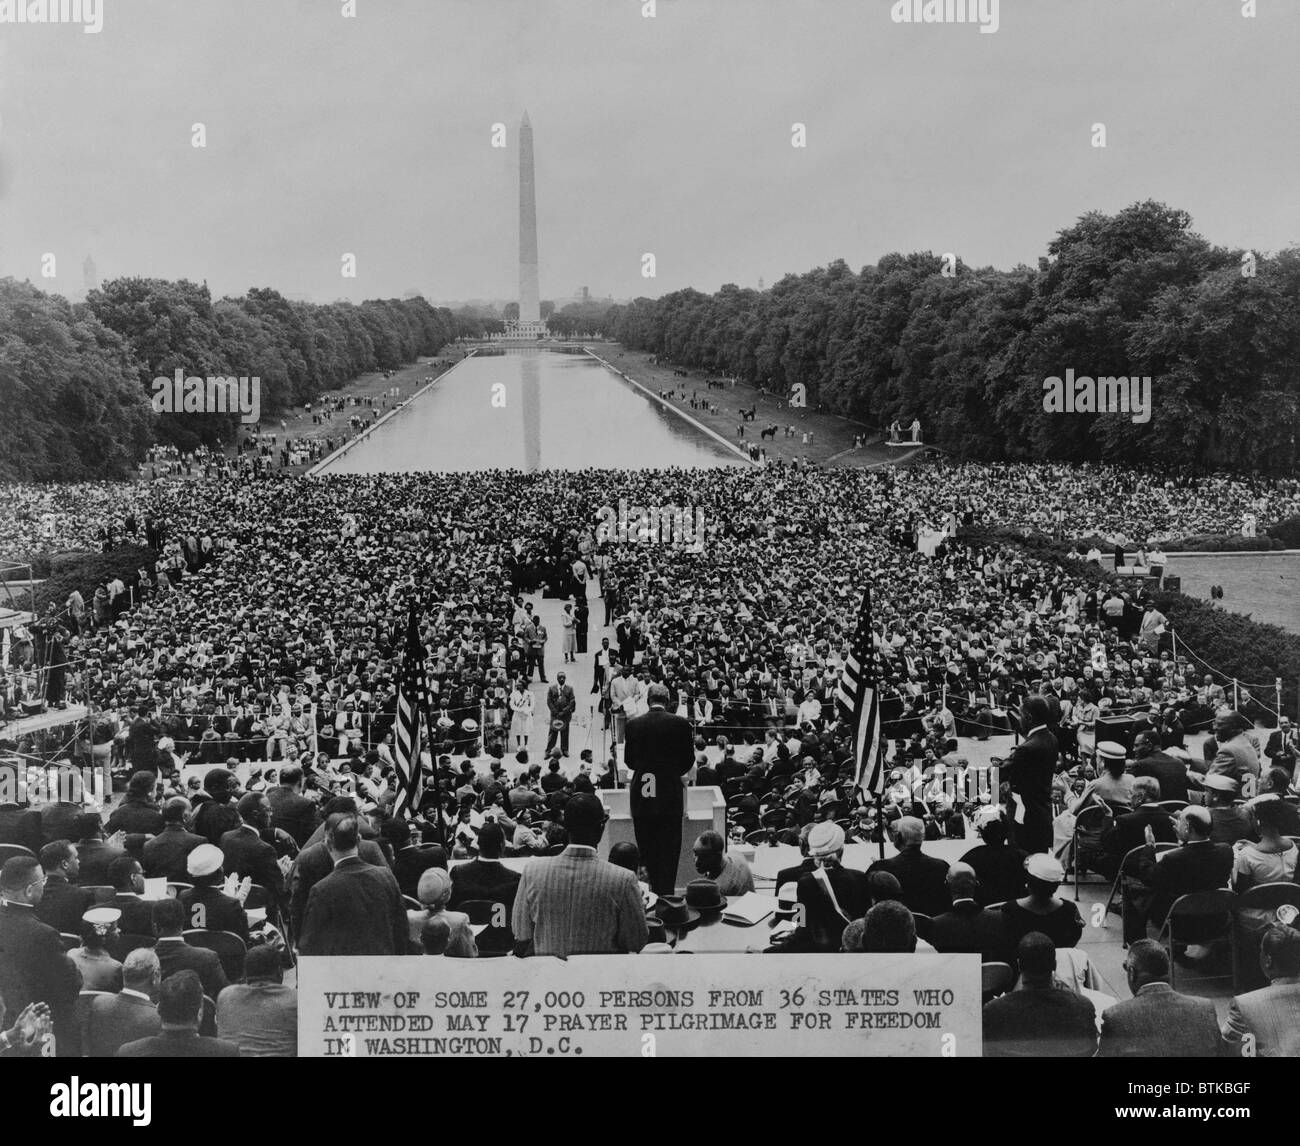 The 1957 civil rights demonstration, Prayer Pilgrimage for Freedom, at the Lincoln Memorial, drew 27,000 people to mark the third anniversary of the Brown v. Board of Education Supreme Court ruling and to protest the slow progress in School desegregation. Stock Photo